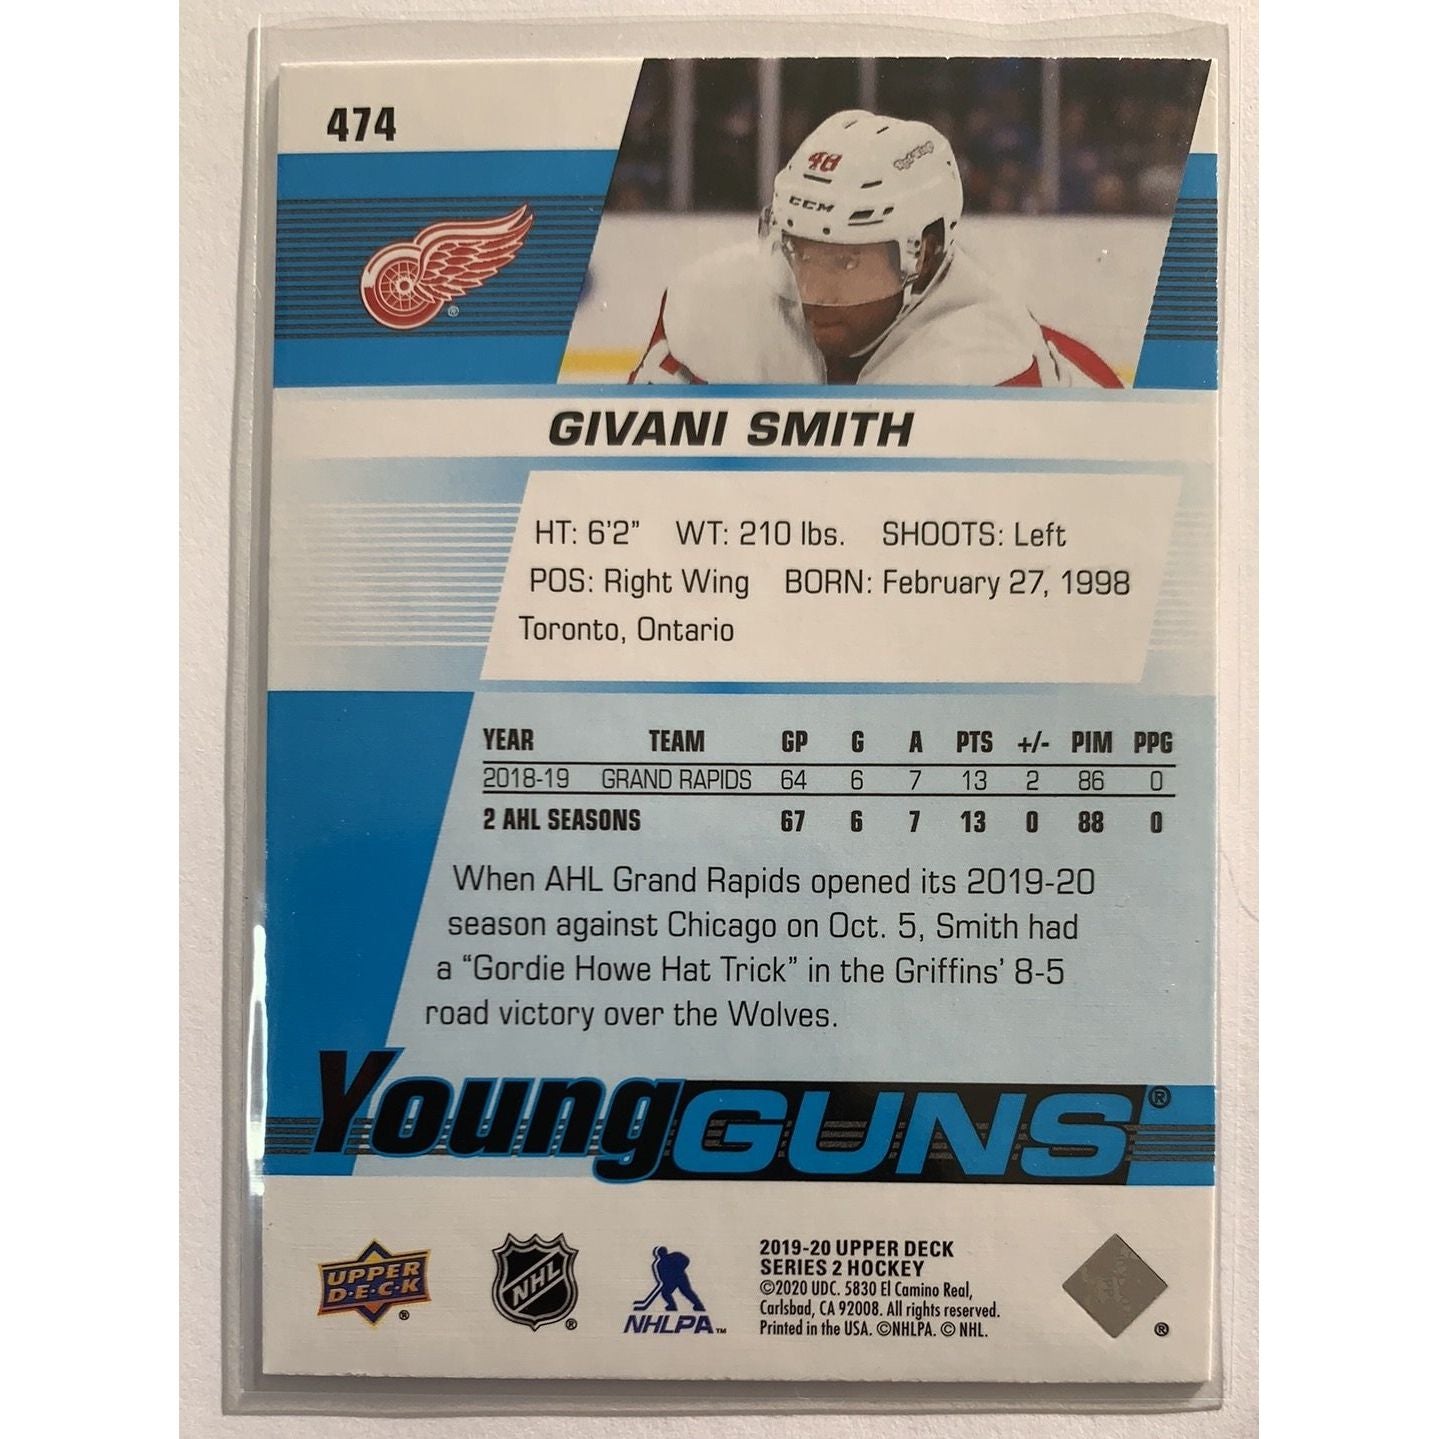  2019-20 Upper Deck Series 2 Givani Smith Young Guns  Local Legends Cards & Collectibles